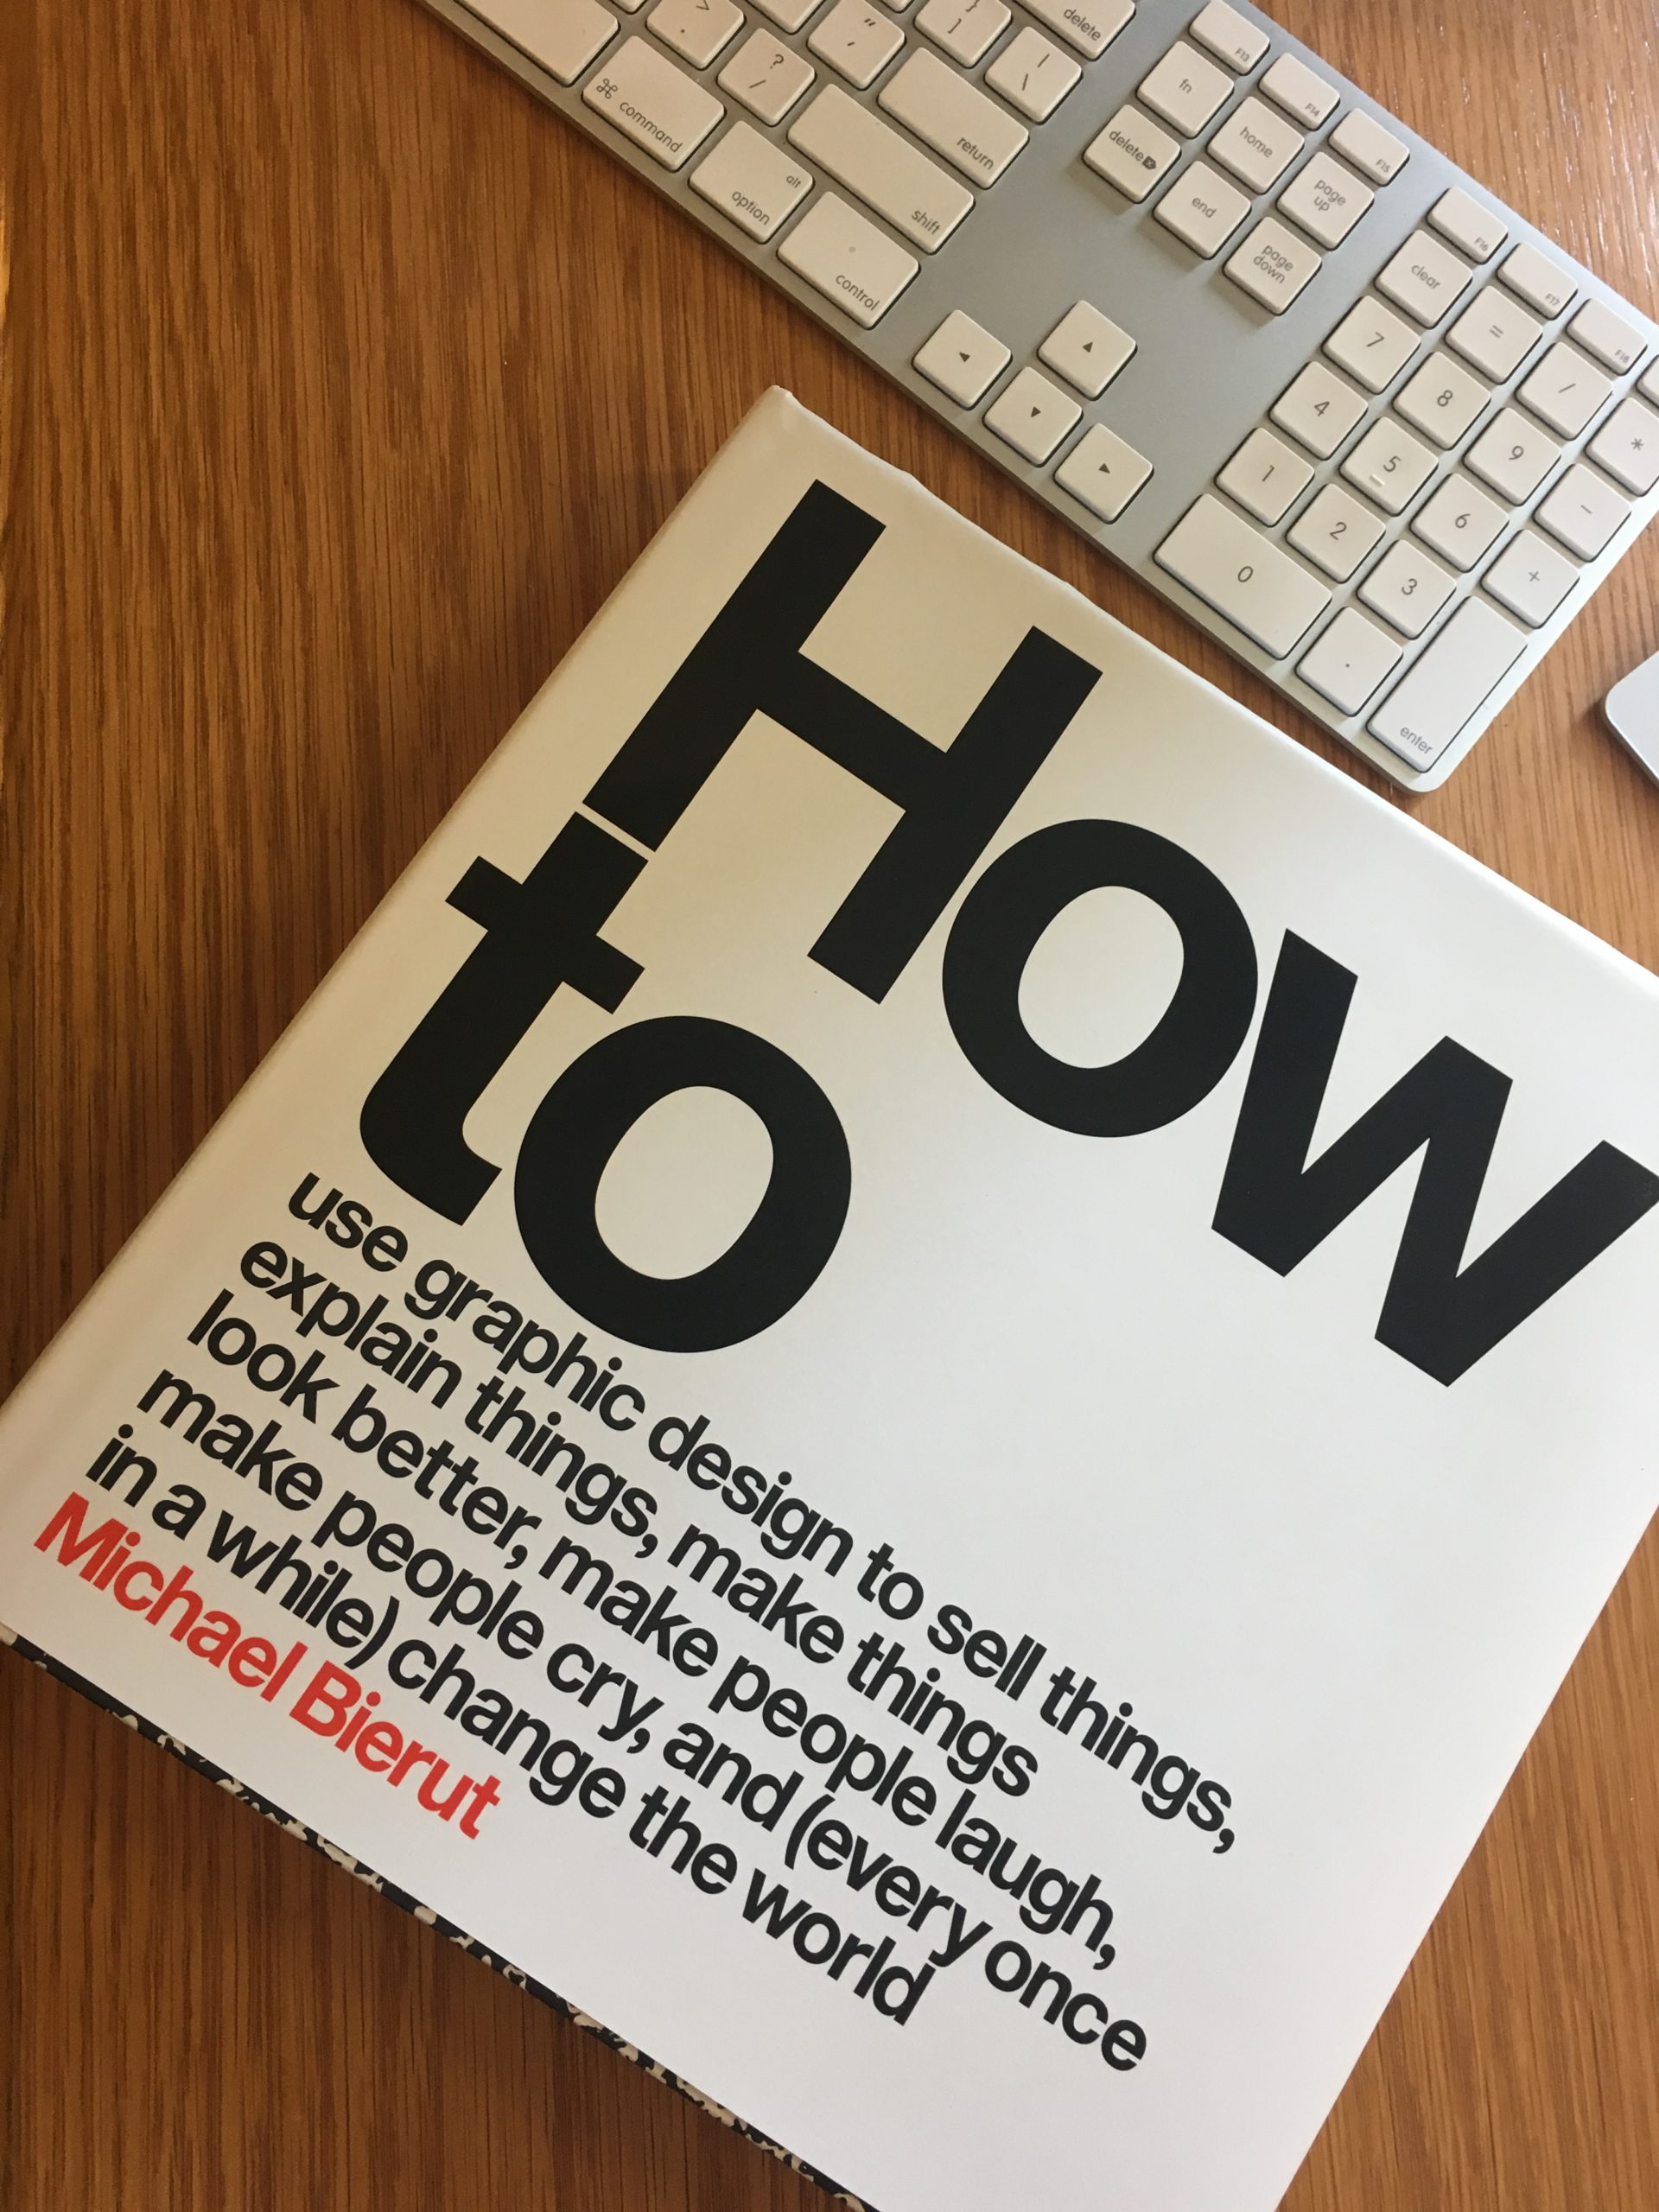 “HOW TO” – Exclusive interview with Michael Bierut – Part 2